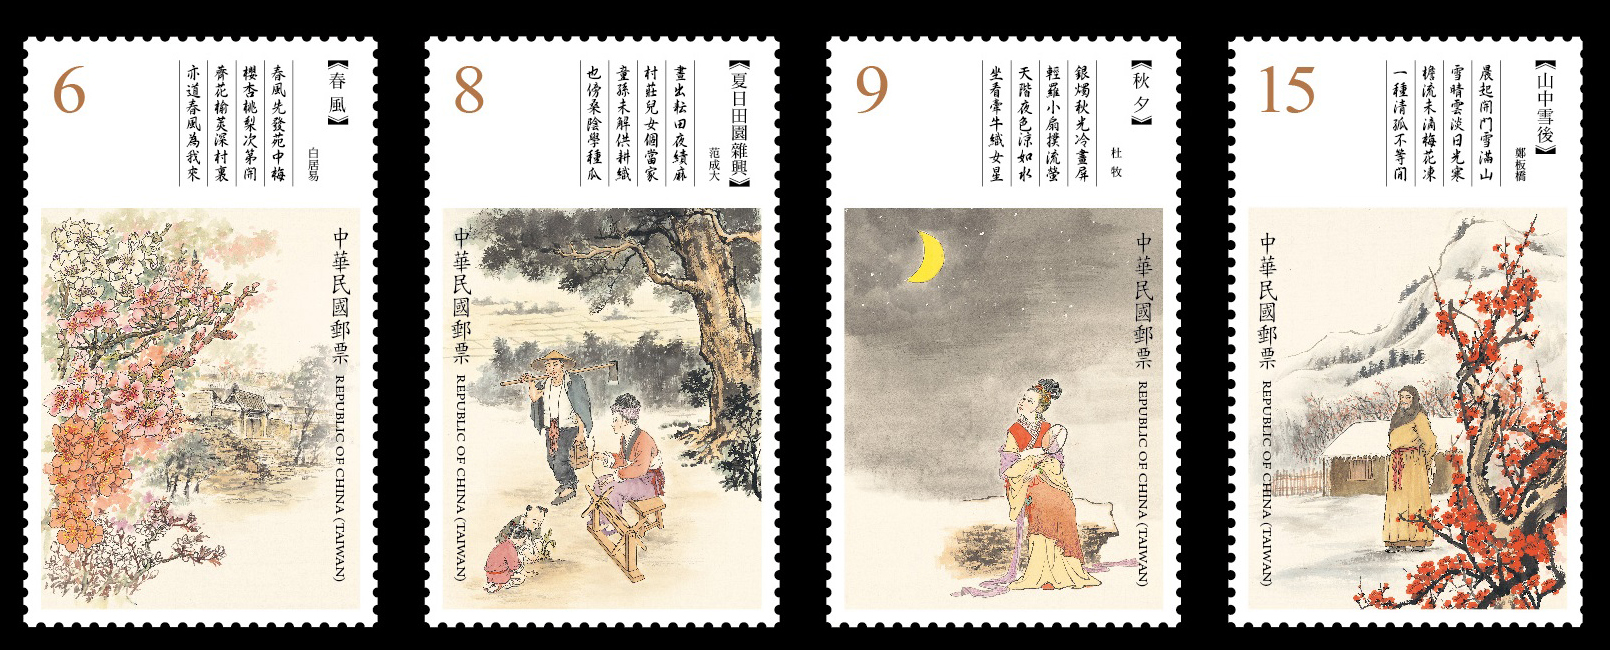 Classical Chinese Poetry Stamps (Issue of 2019)